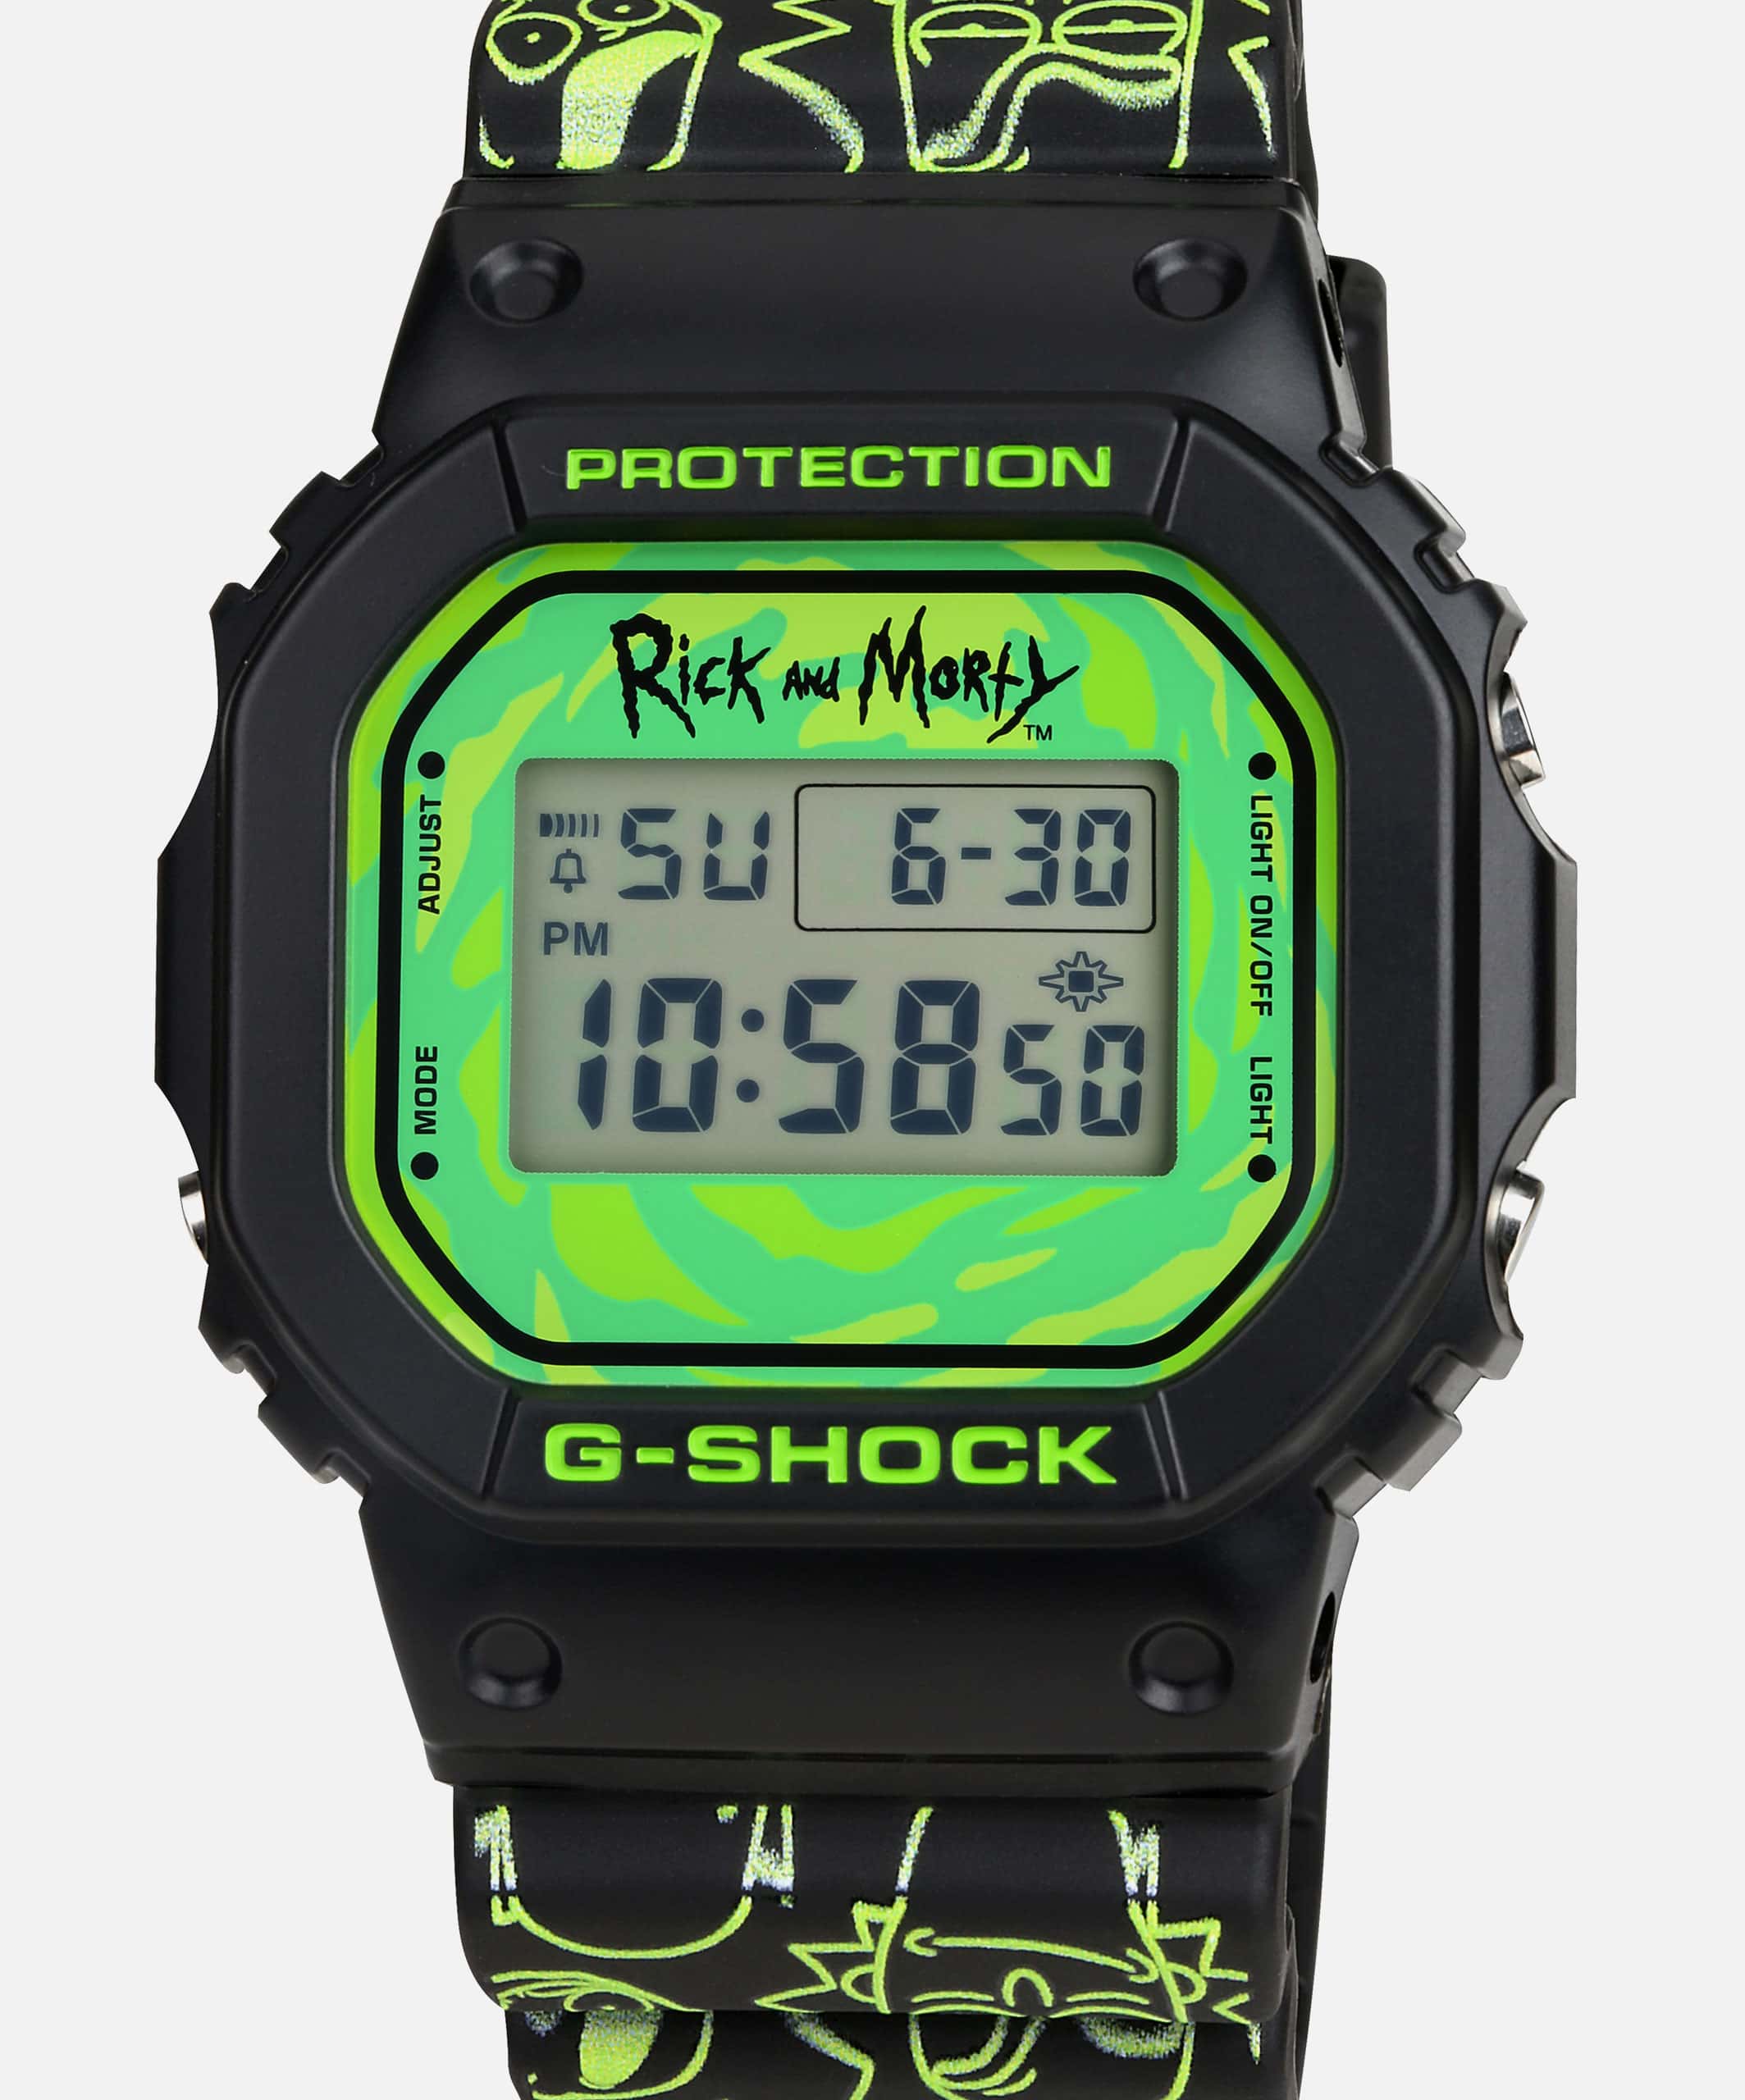 G-Shock Shows Us What They’ve Got with this New Rick and Morty Limited Edition